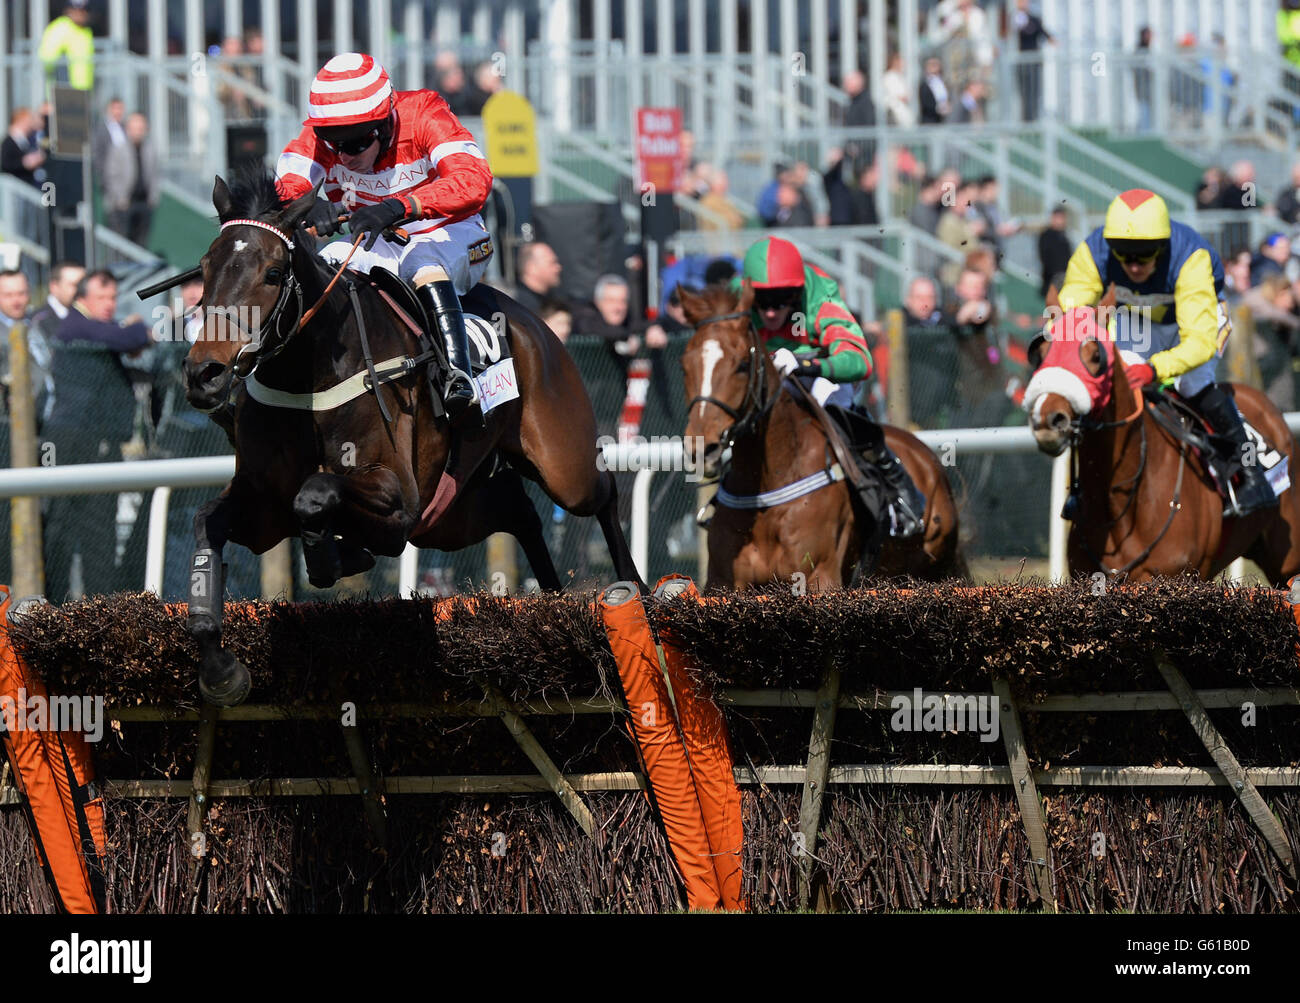 L'Unique and Wayne Hutchinson jump the final hurdle on their way to victory in the Matalan Anniversary Hurdle Rcae during Grand Opening Day of the 2013 John Smith's Grand National Meeting at Aintree Racecourse, Sefton. Stock Photo